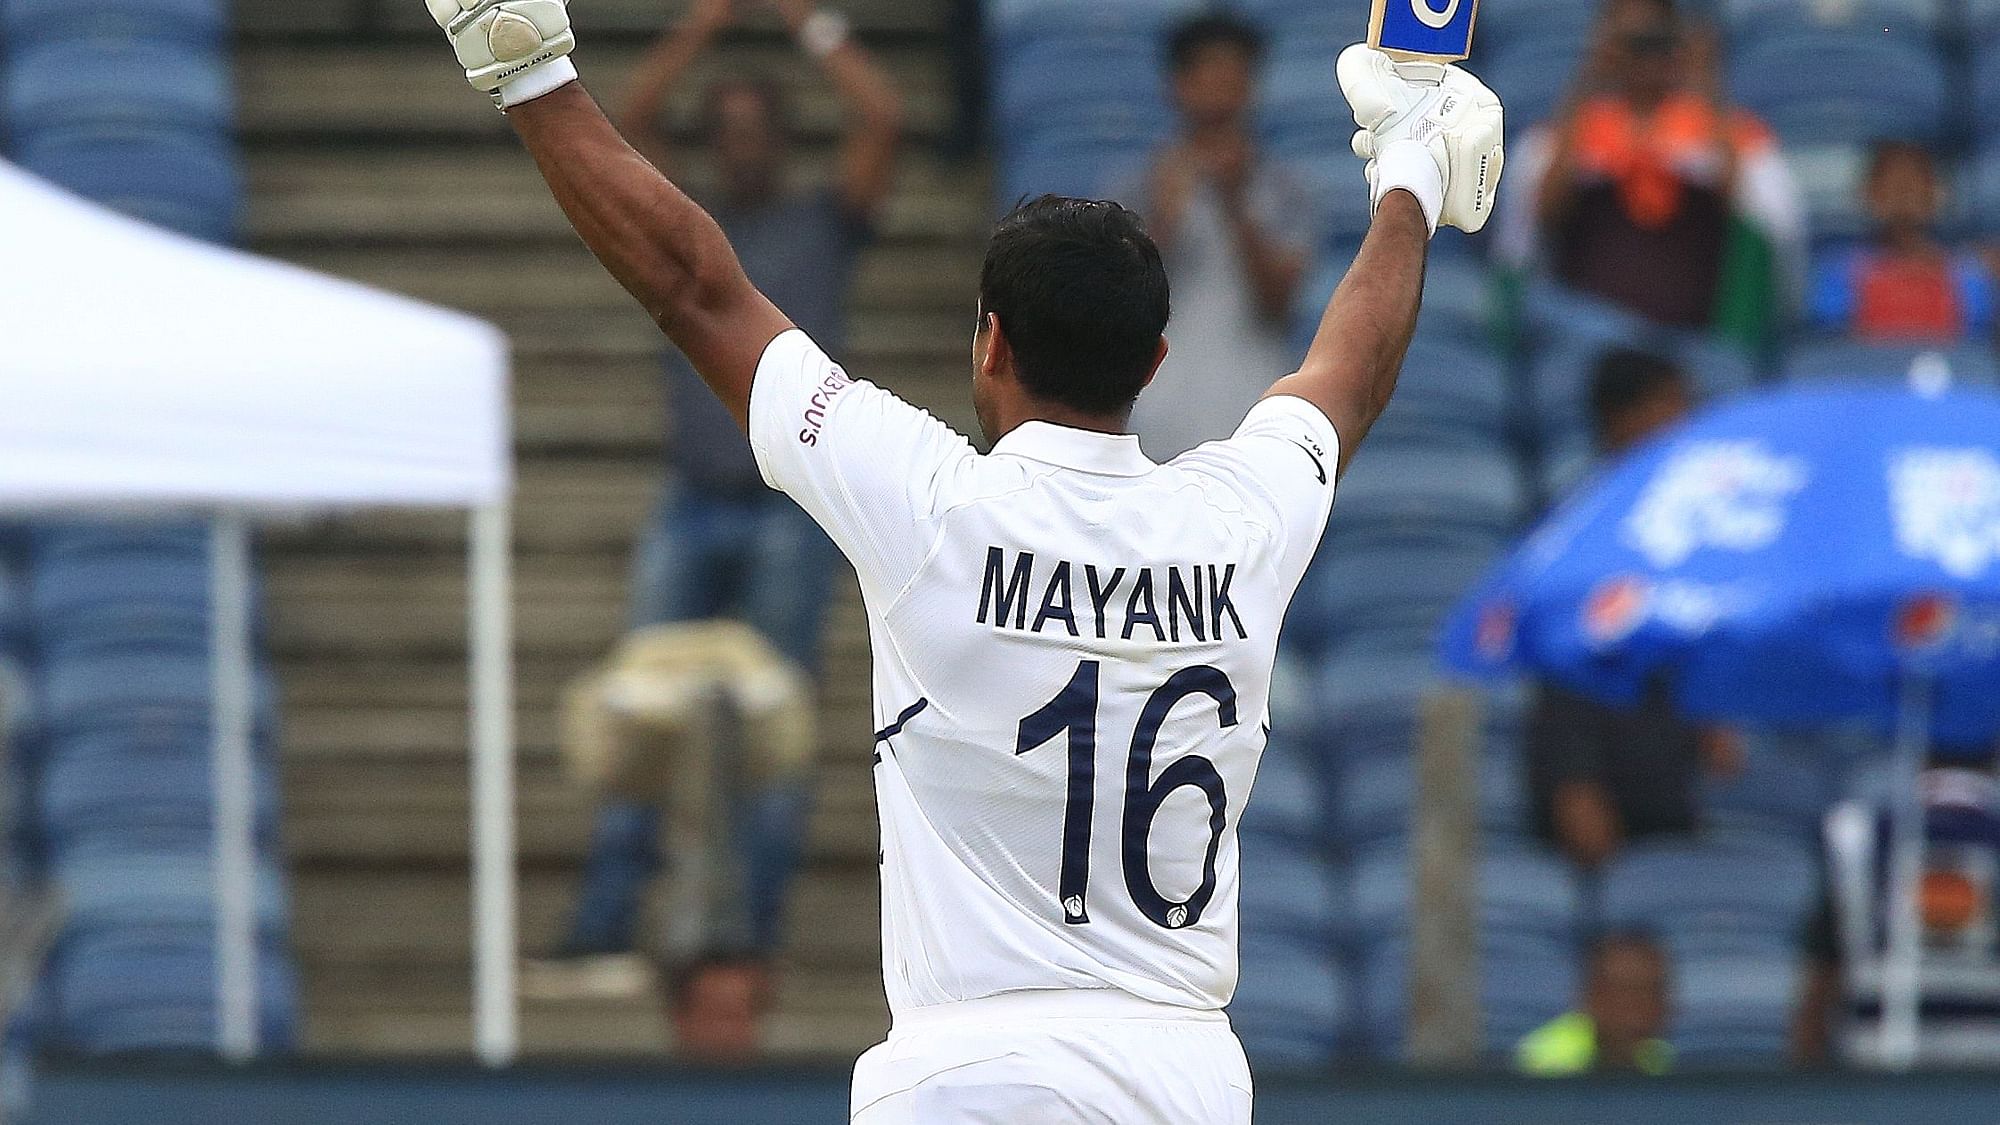 Mayank Agarwal scored his second straight century, on Day 1 of the Pune Test against South Africa.